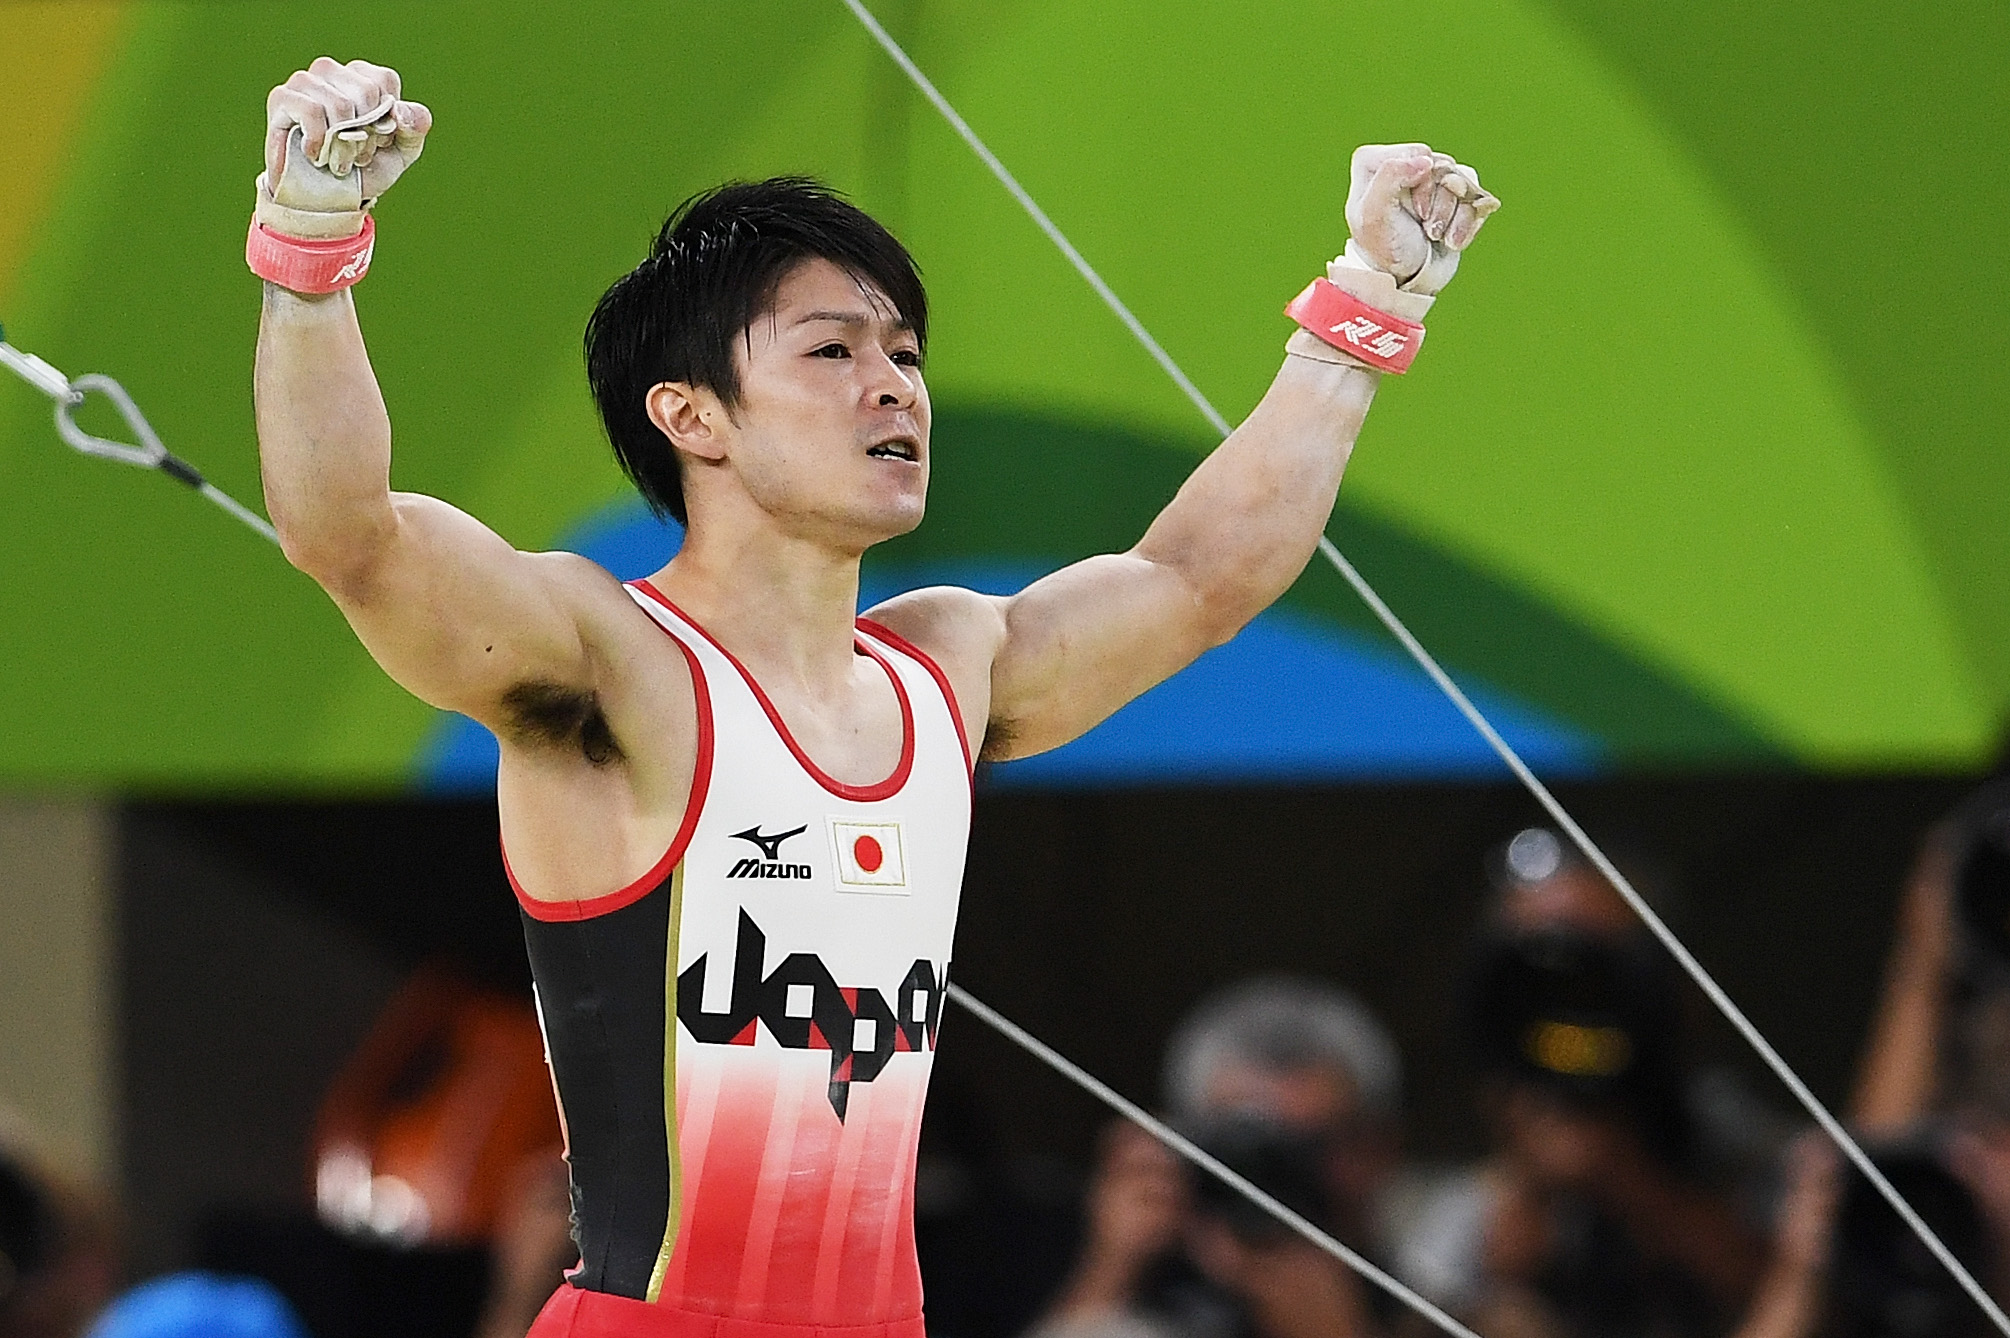 Kohei Uchimura of Japan reacts after competing on the horizontal bar during the Men's Individual All-Around final on Day 5 of the Rio 2016 Olympic Games at the Rio Olympic Arena on Aug. 10, 2016 in Rio de Janeiro. (Laurence Griffiths&mdash;Getty Images)